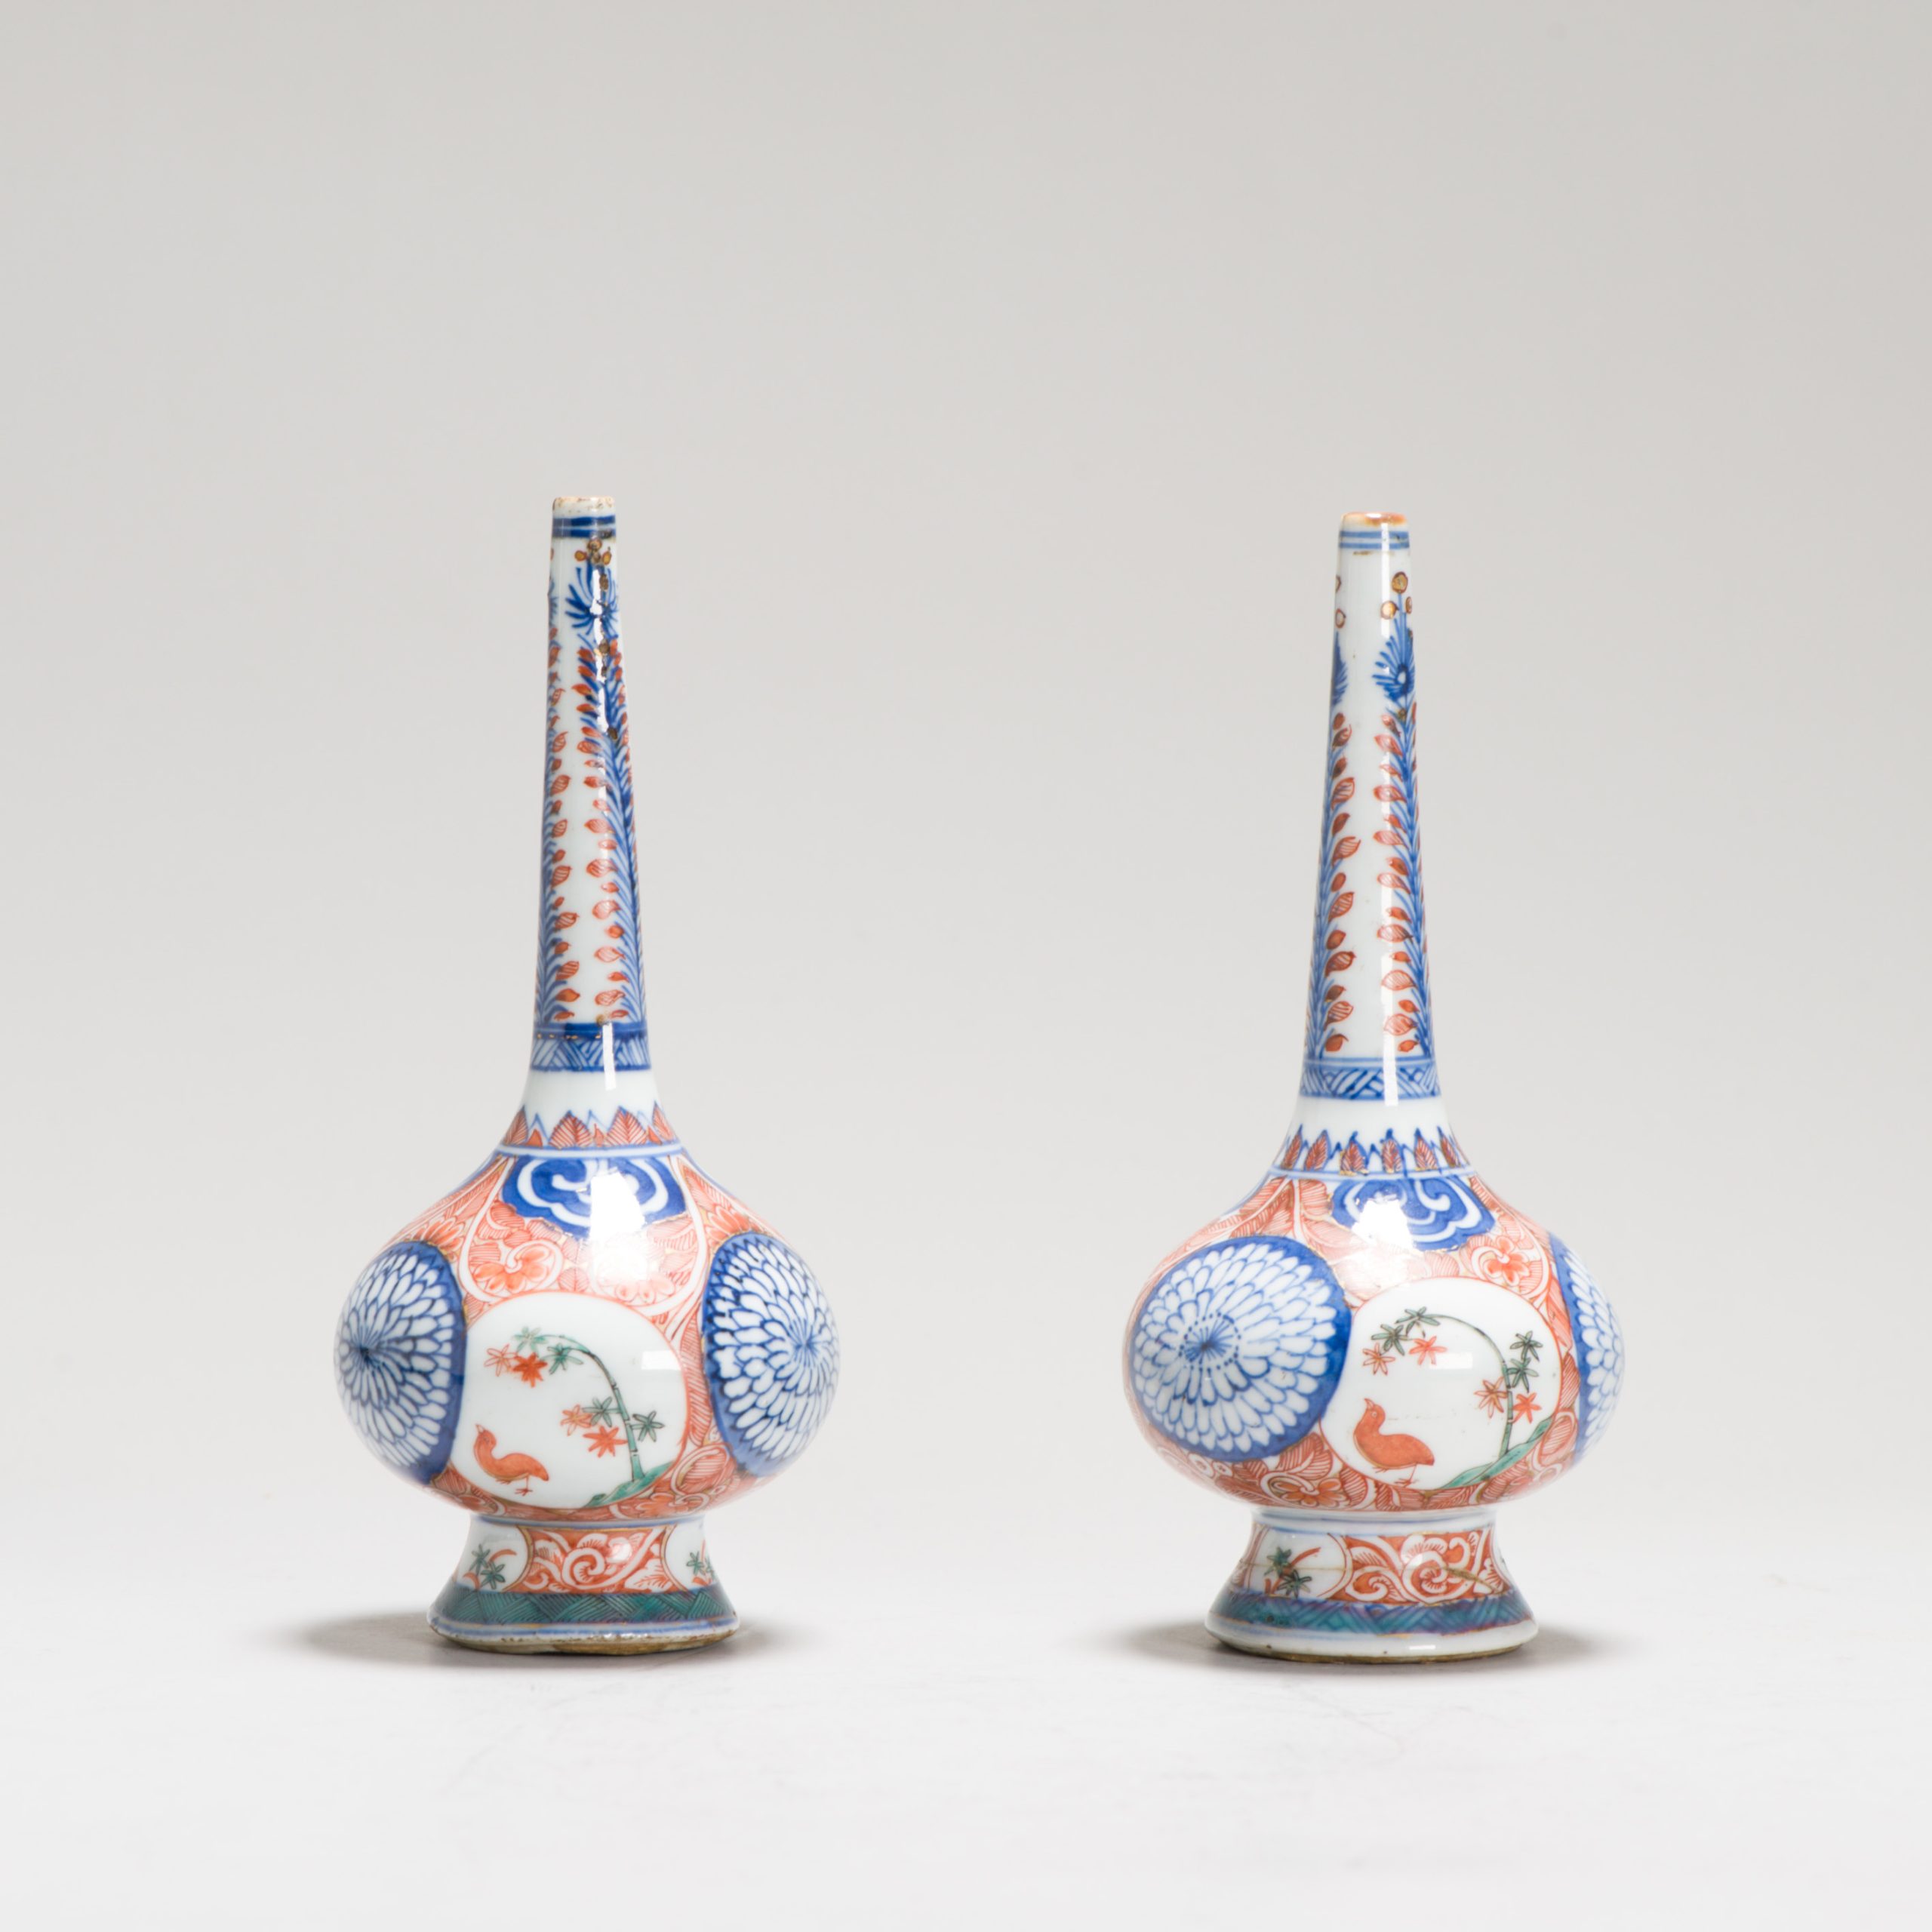 1244 & 1245 A Lovely Pair of Rose Watersprinklers Painted in Europe on a Chinese blue and white. Dutch Decorated